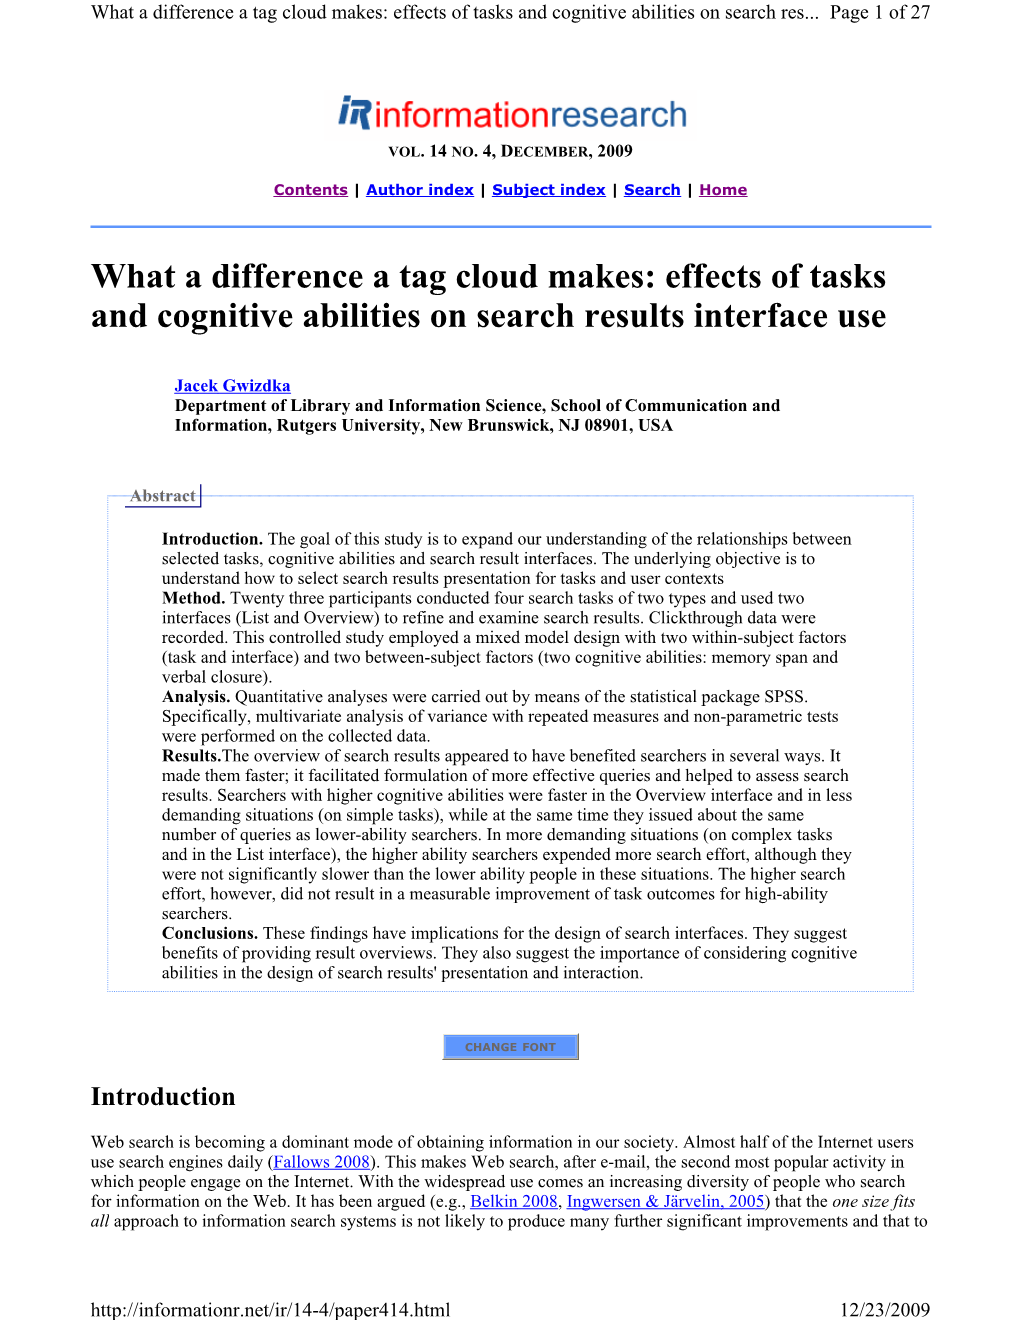 What a Difference a Tag Cloud Makes: Effects of Tasks and Cognitive Abilities on Search Res